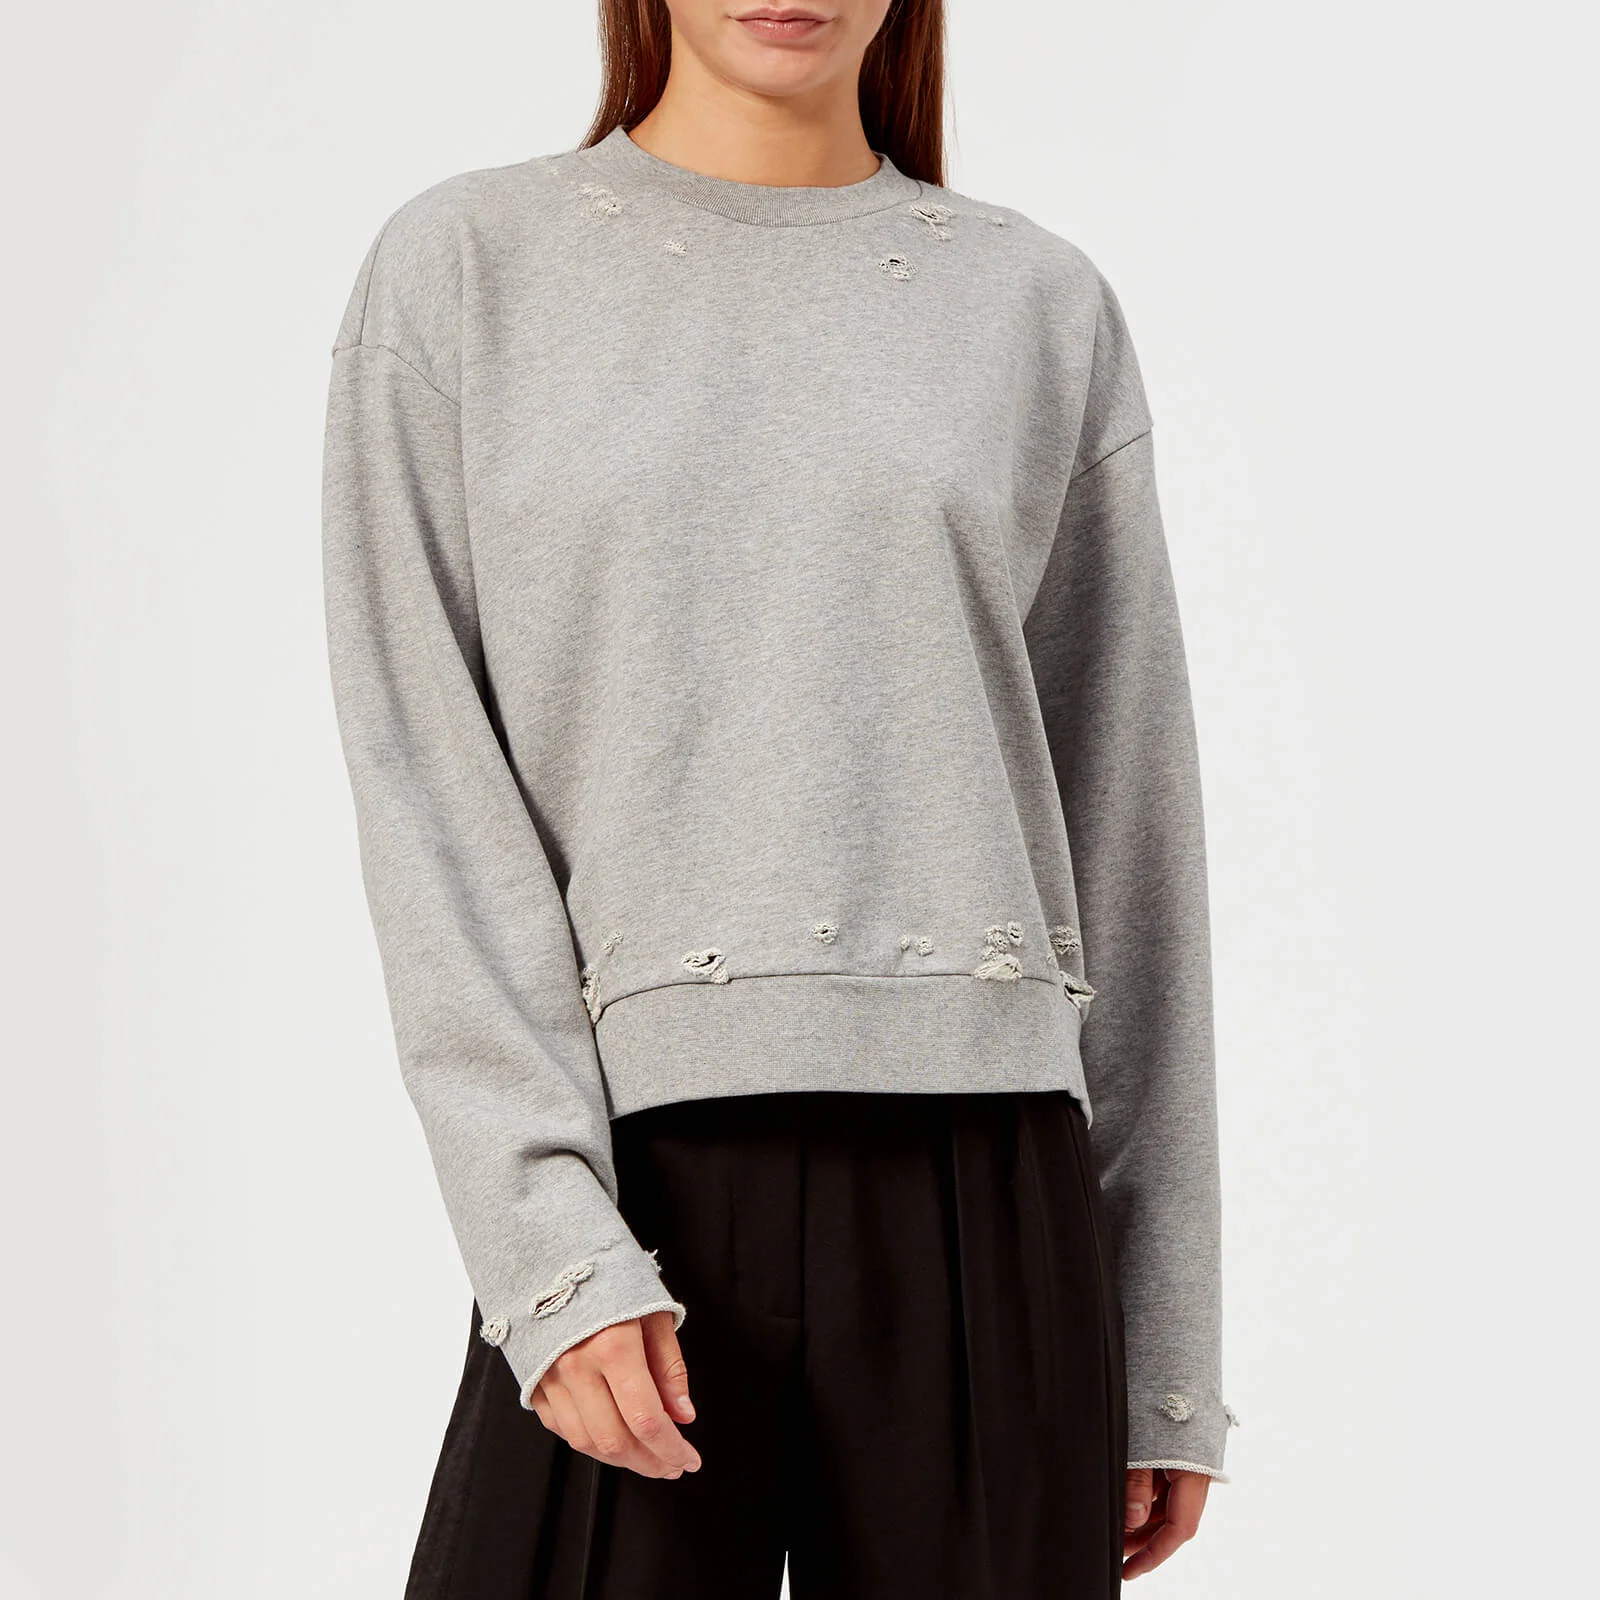 T by Alexander Wang Women's Dry French Terry Distressed Sweatshirt - Heather Grey Image 1